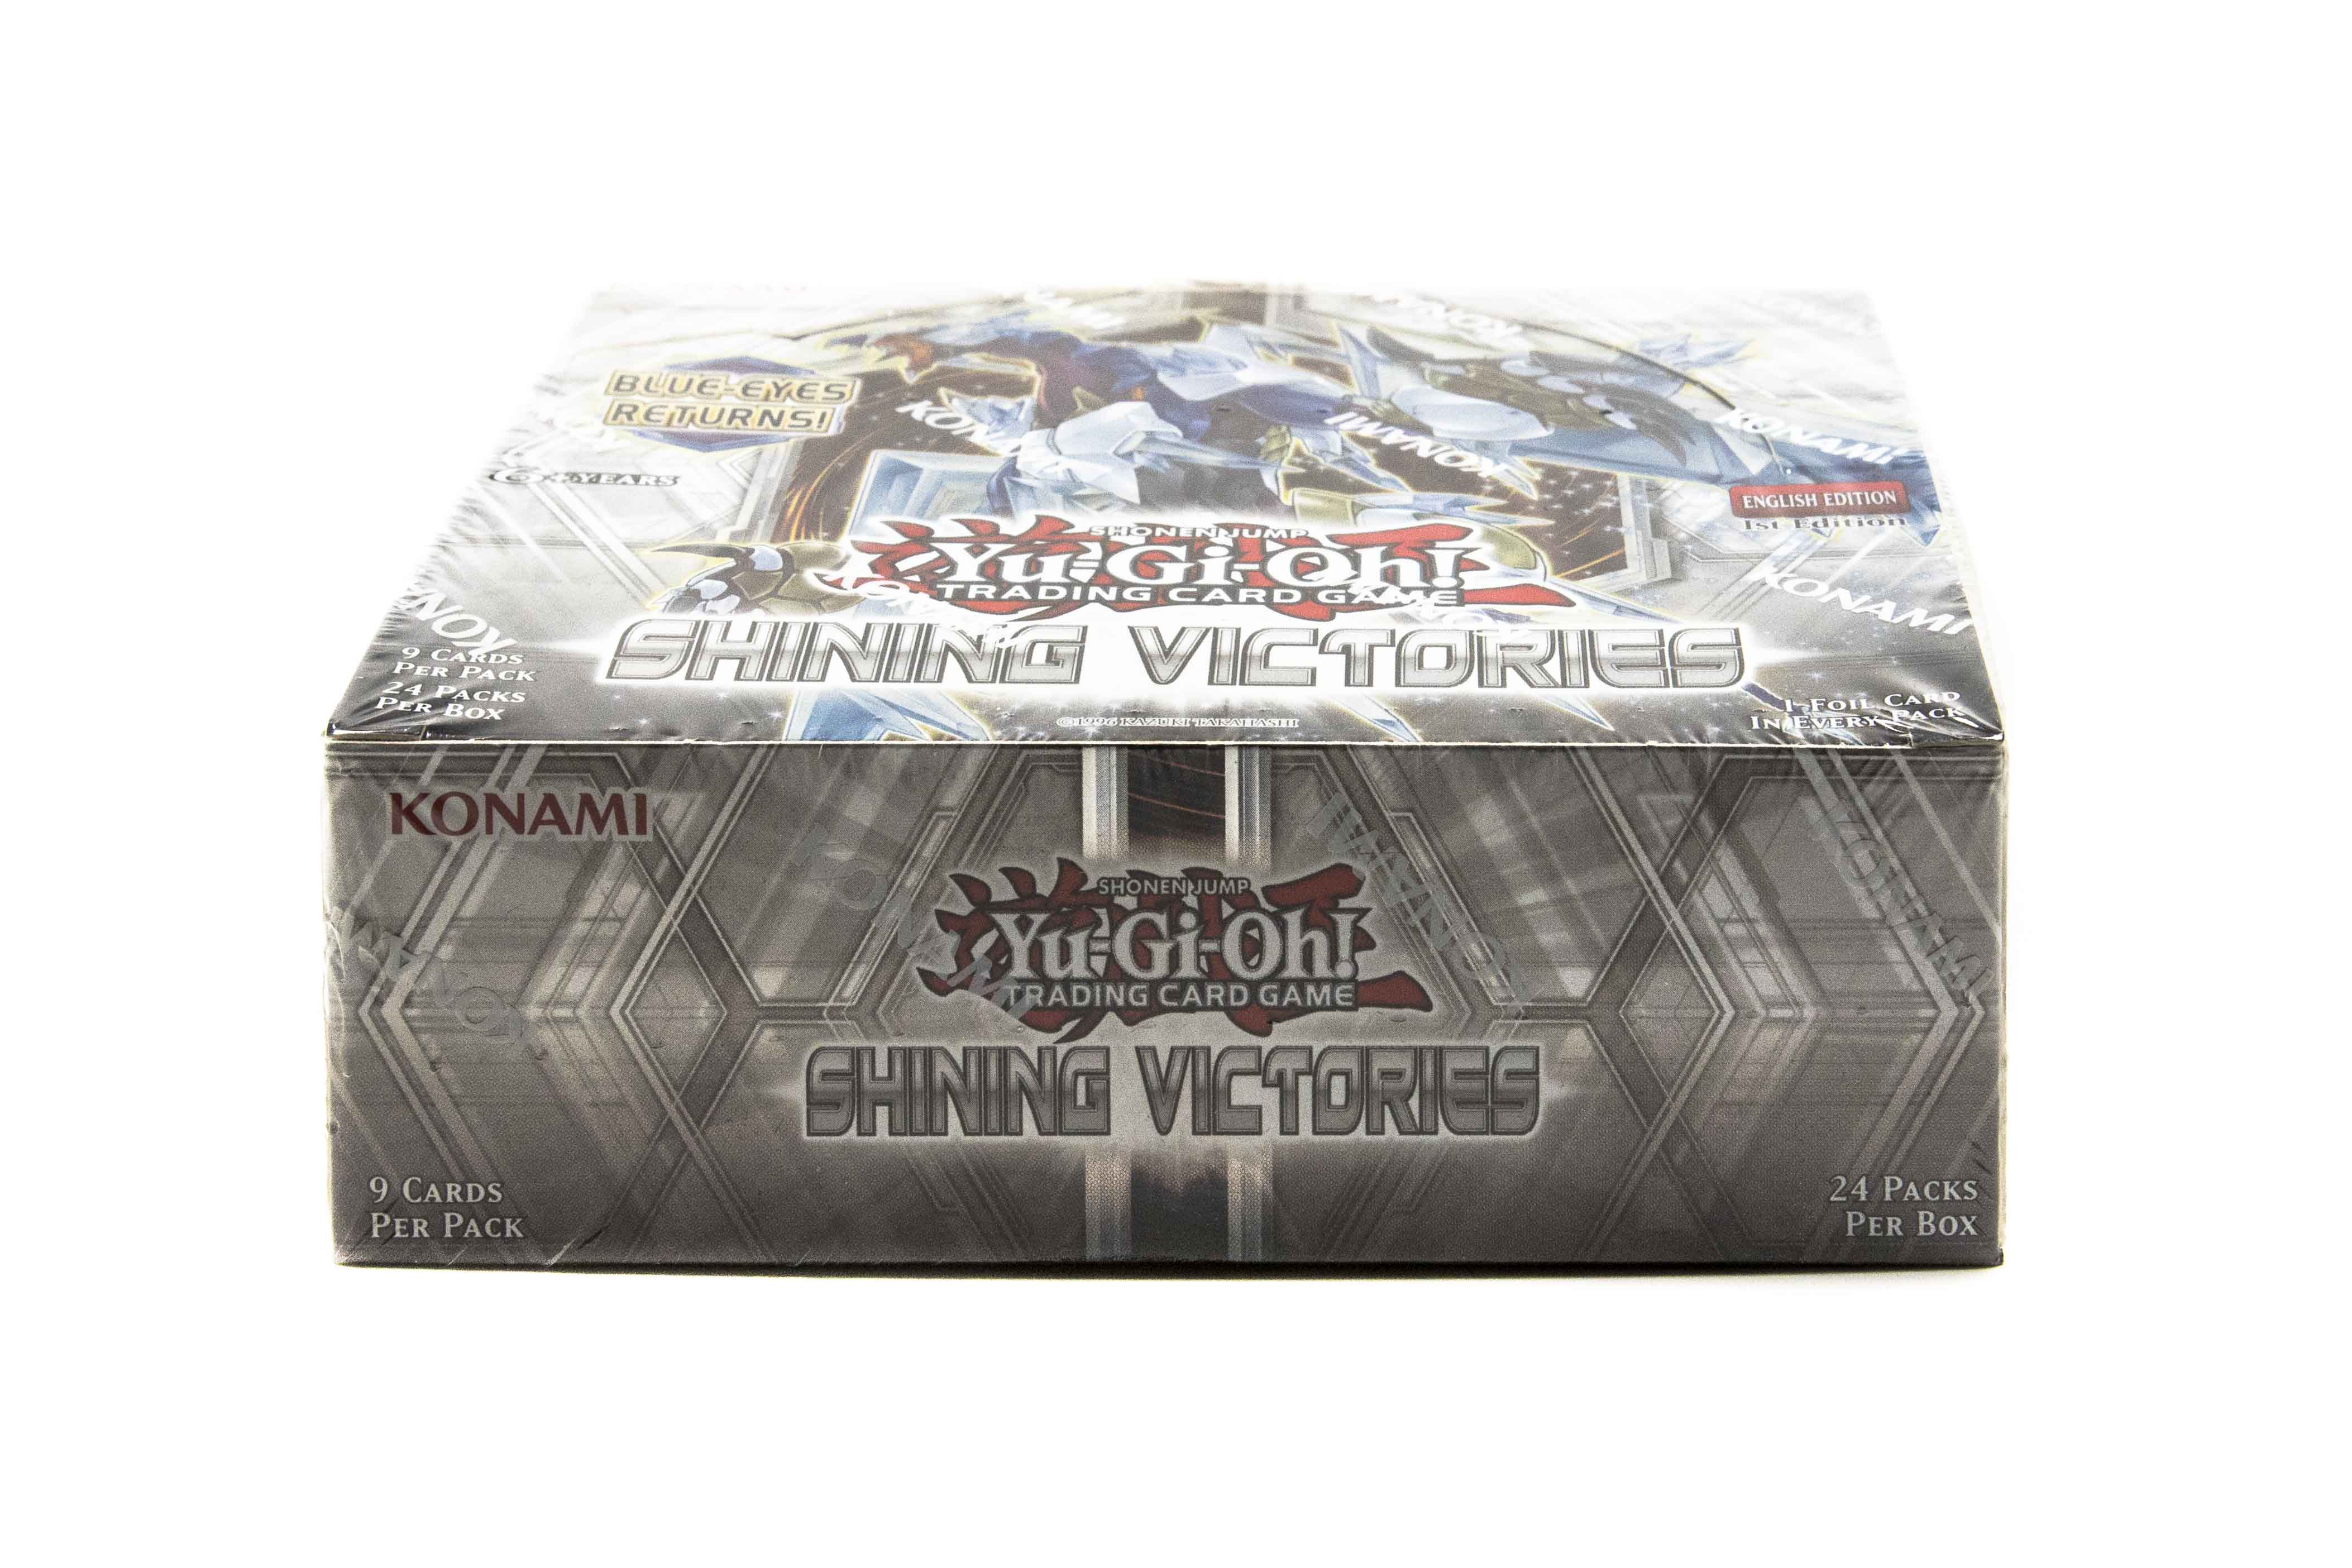 Shining Victories Booster Box